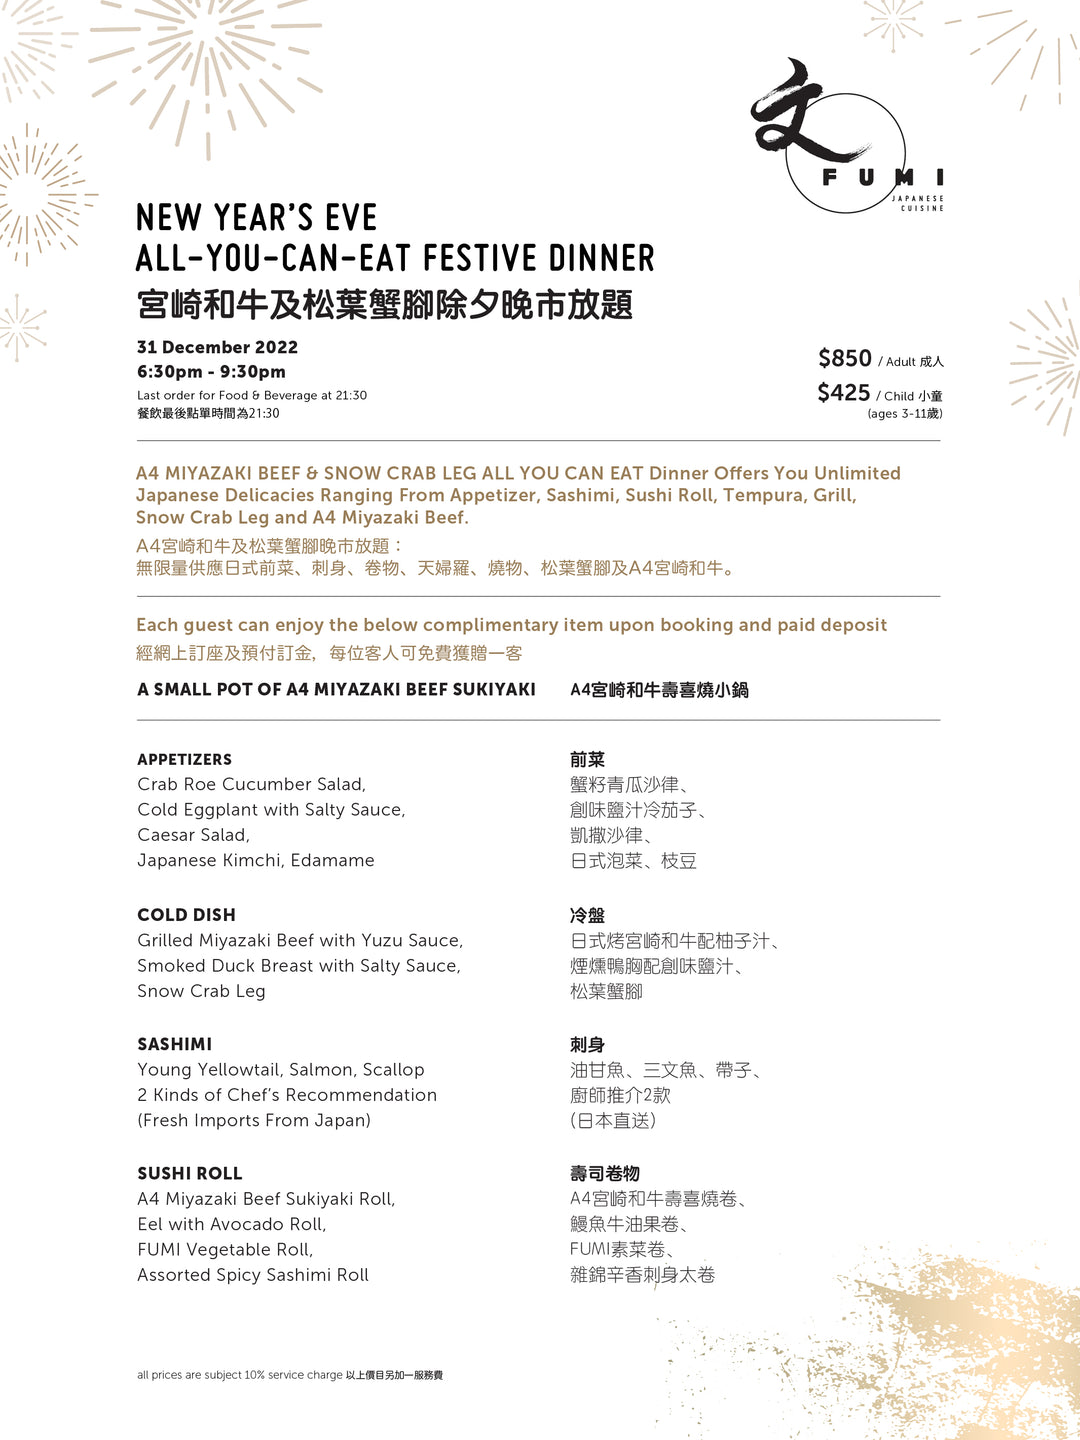 FUMI New Year's Eve Dinner